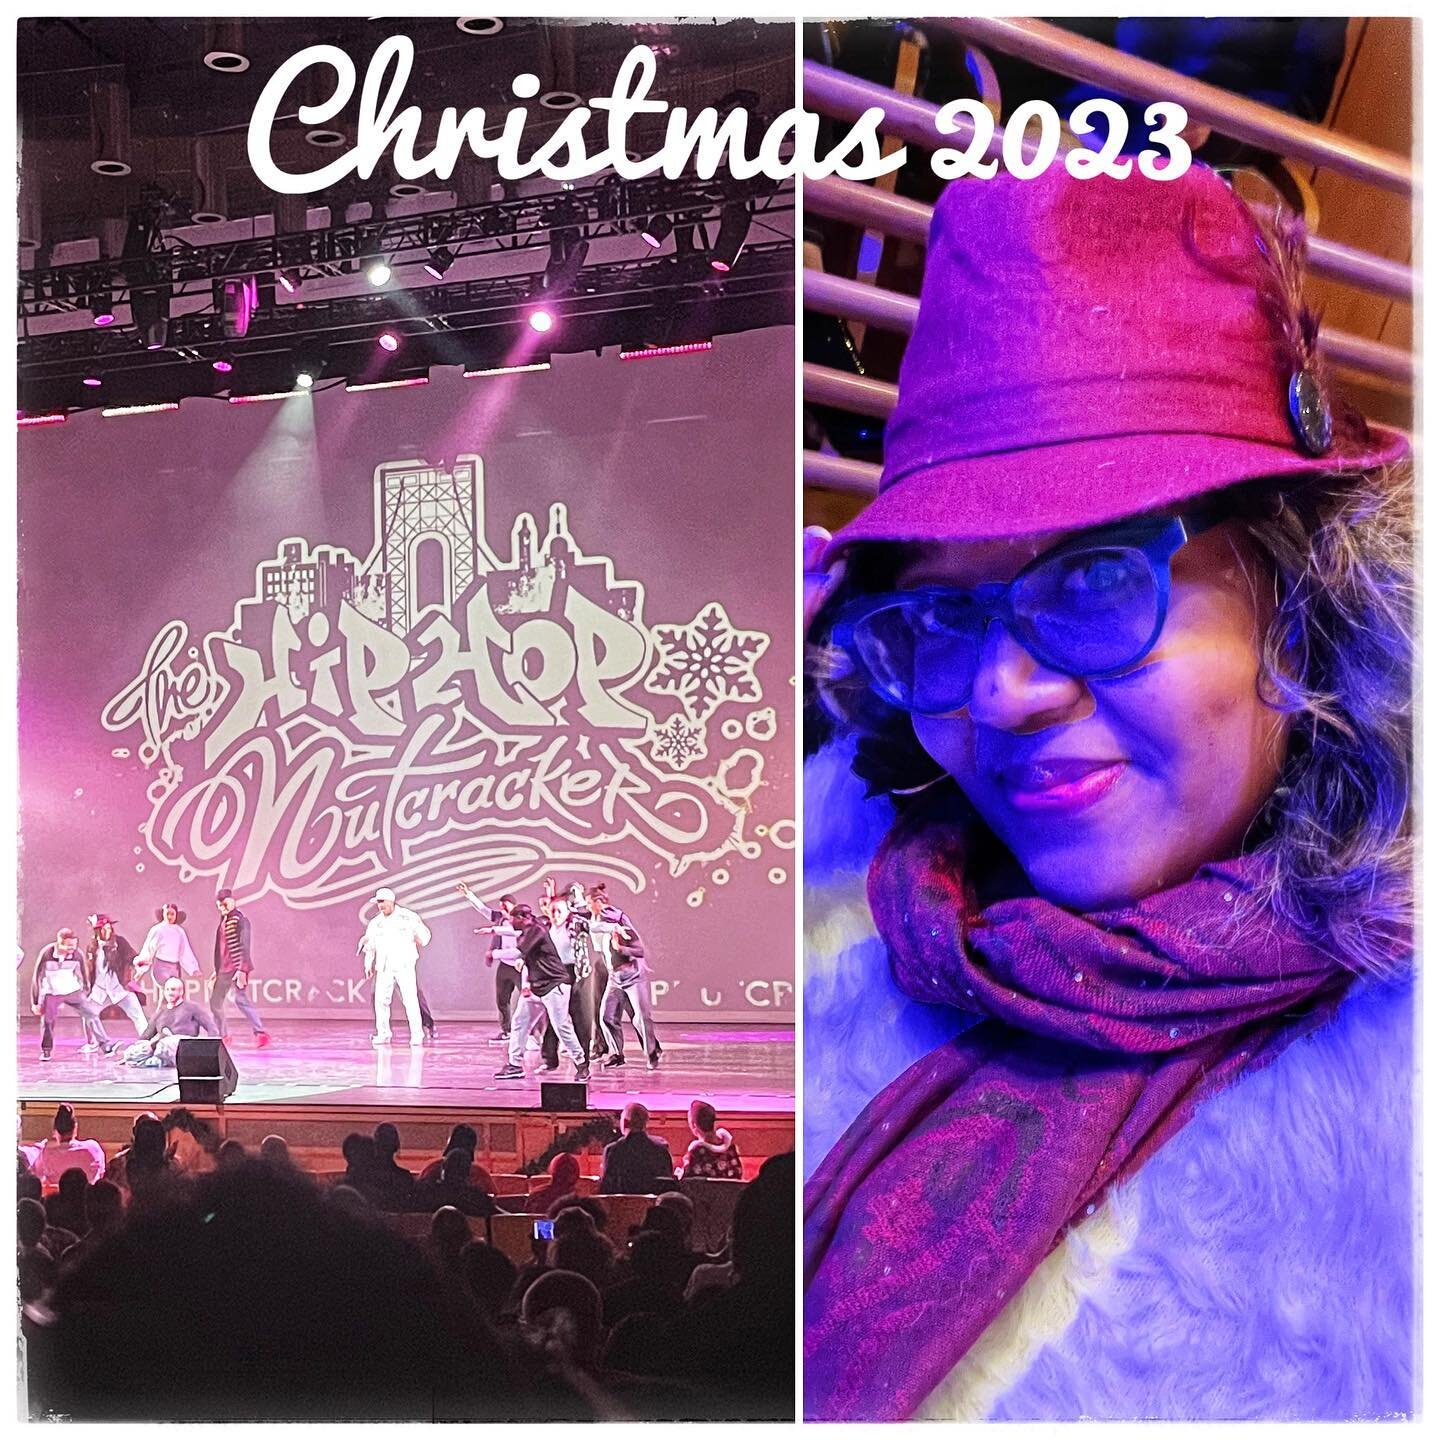 Enjoyed a great holiday performance from the Emmy-award winning production, the Hip Hop Nutcracker. The talent on that stage put both heart and soul in each dance performance. It was a great reminder of the importance of supporting the arts. #falala 